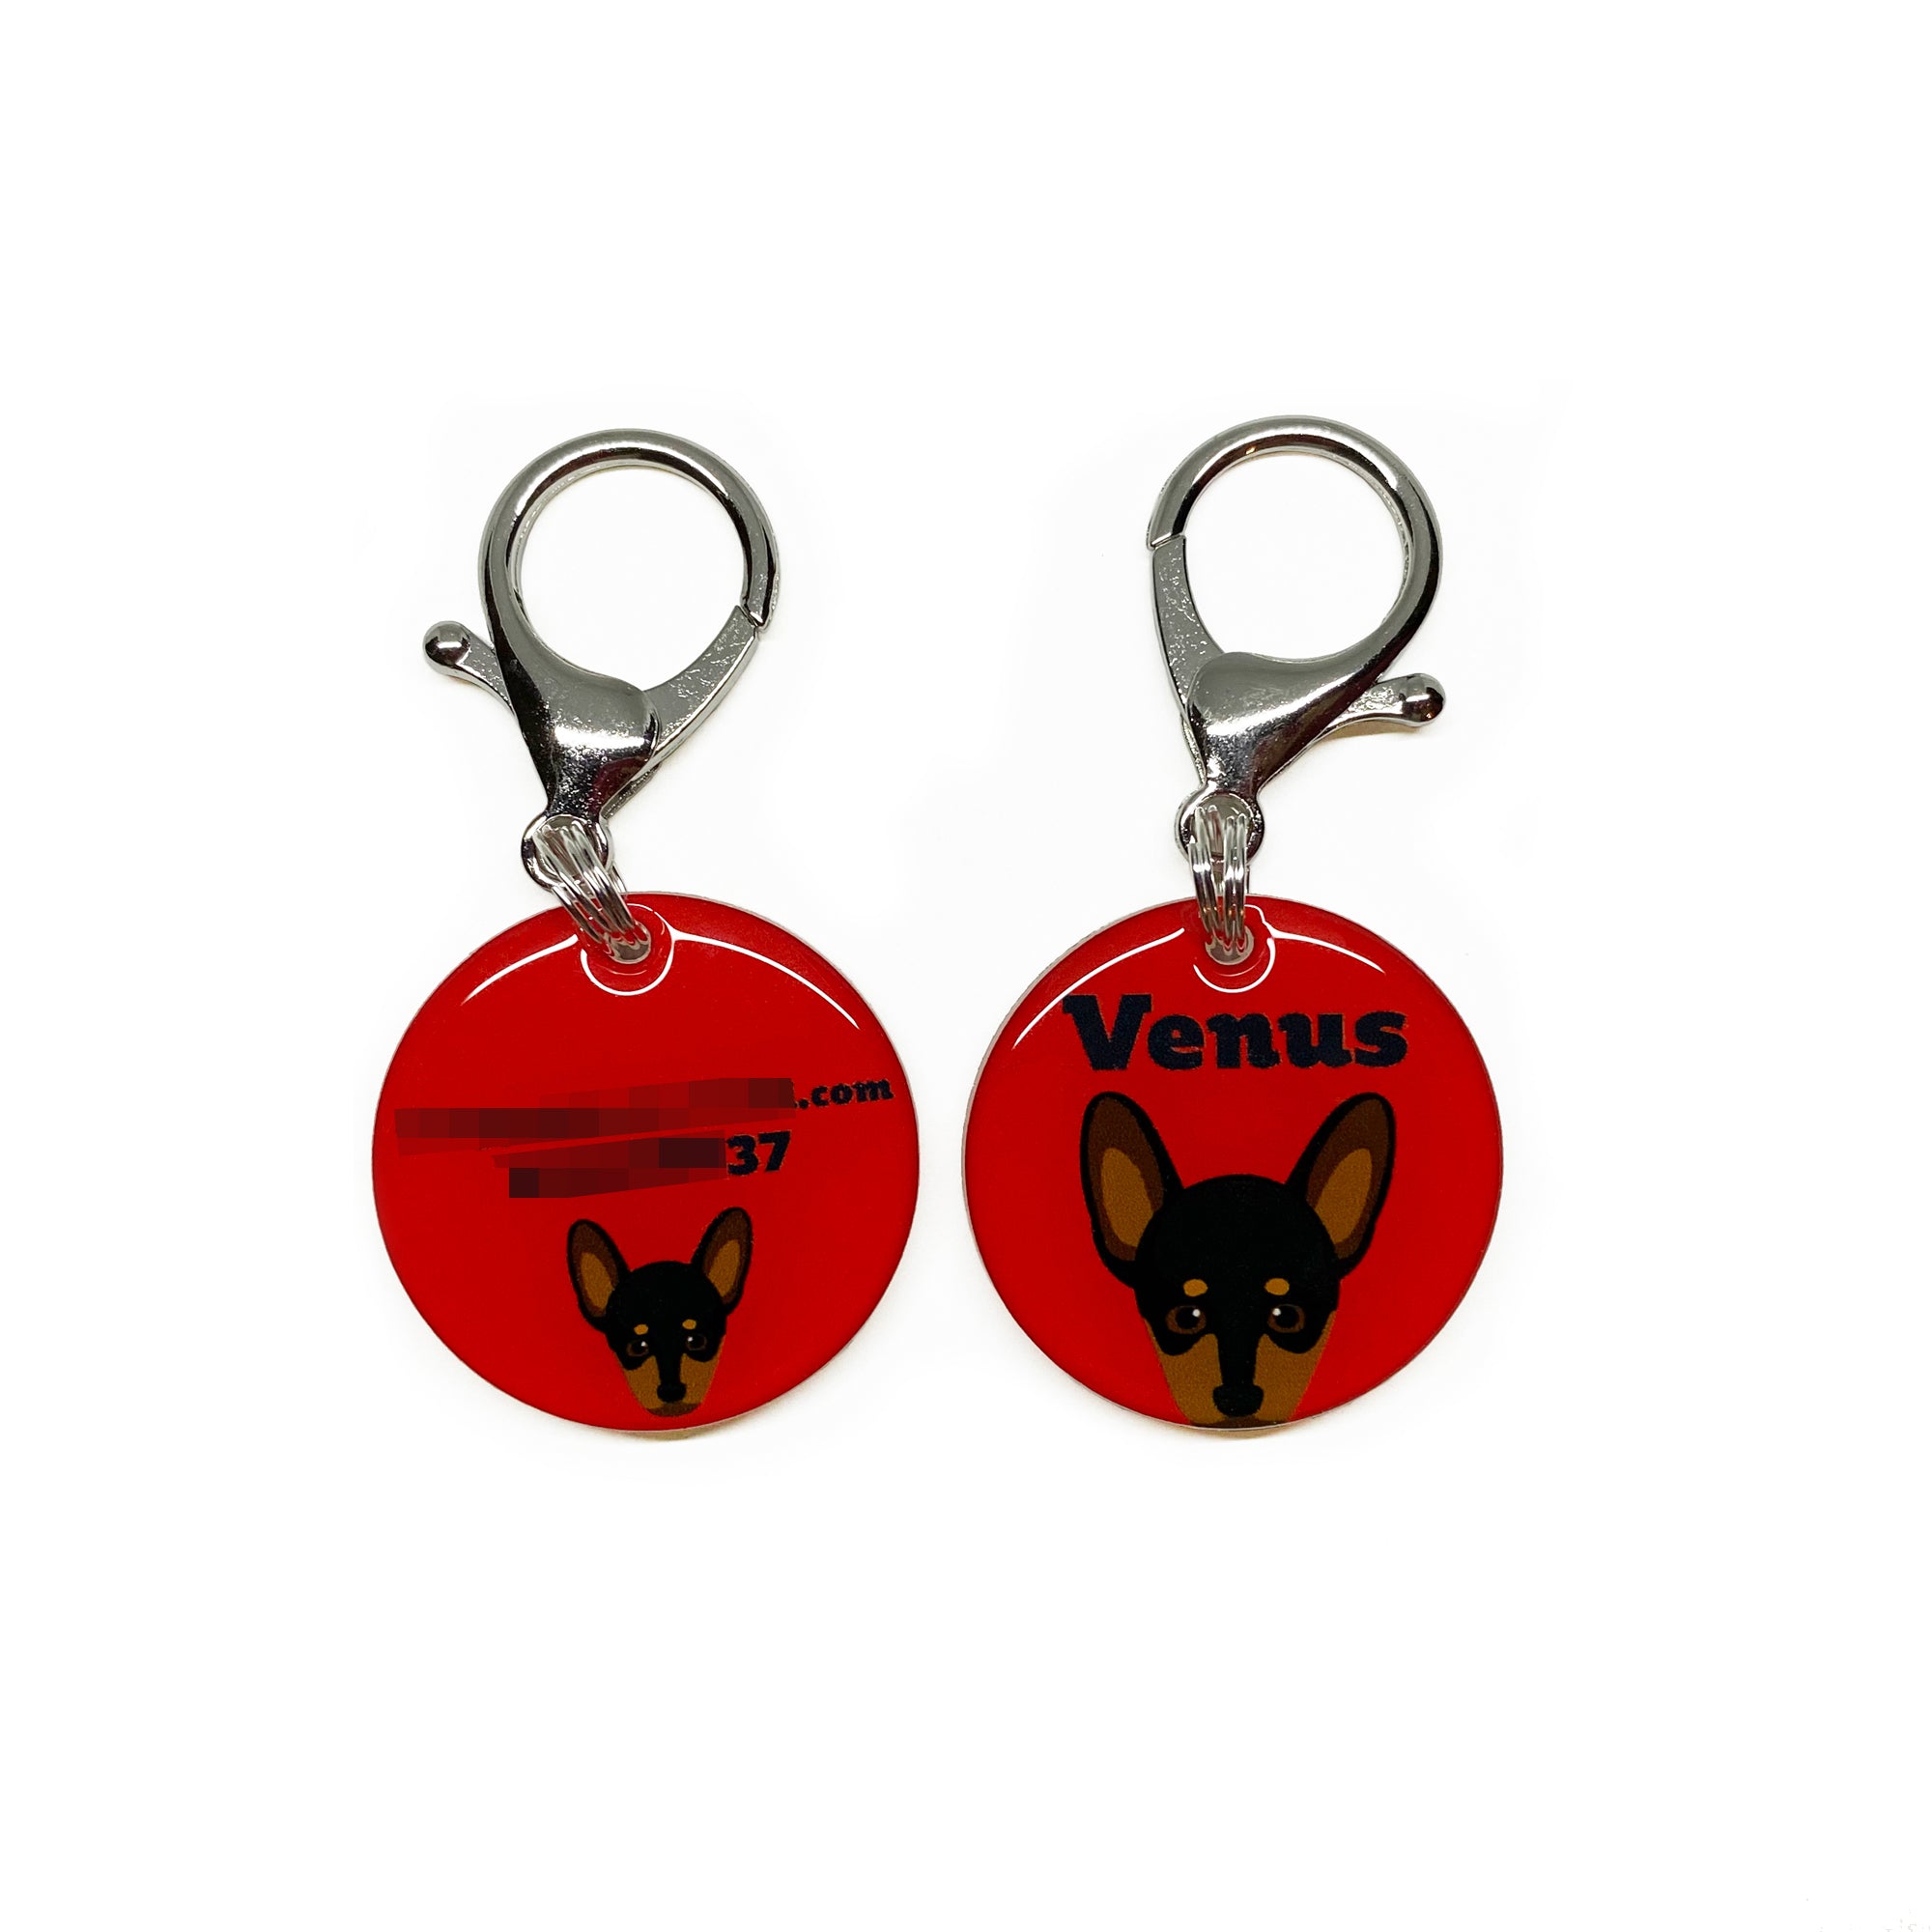 Miniature Pinscher Double-Sided Dog Tag | Unique Pet ID Tags by Bashtags®